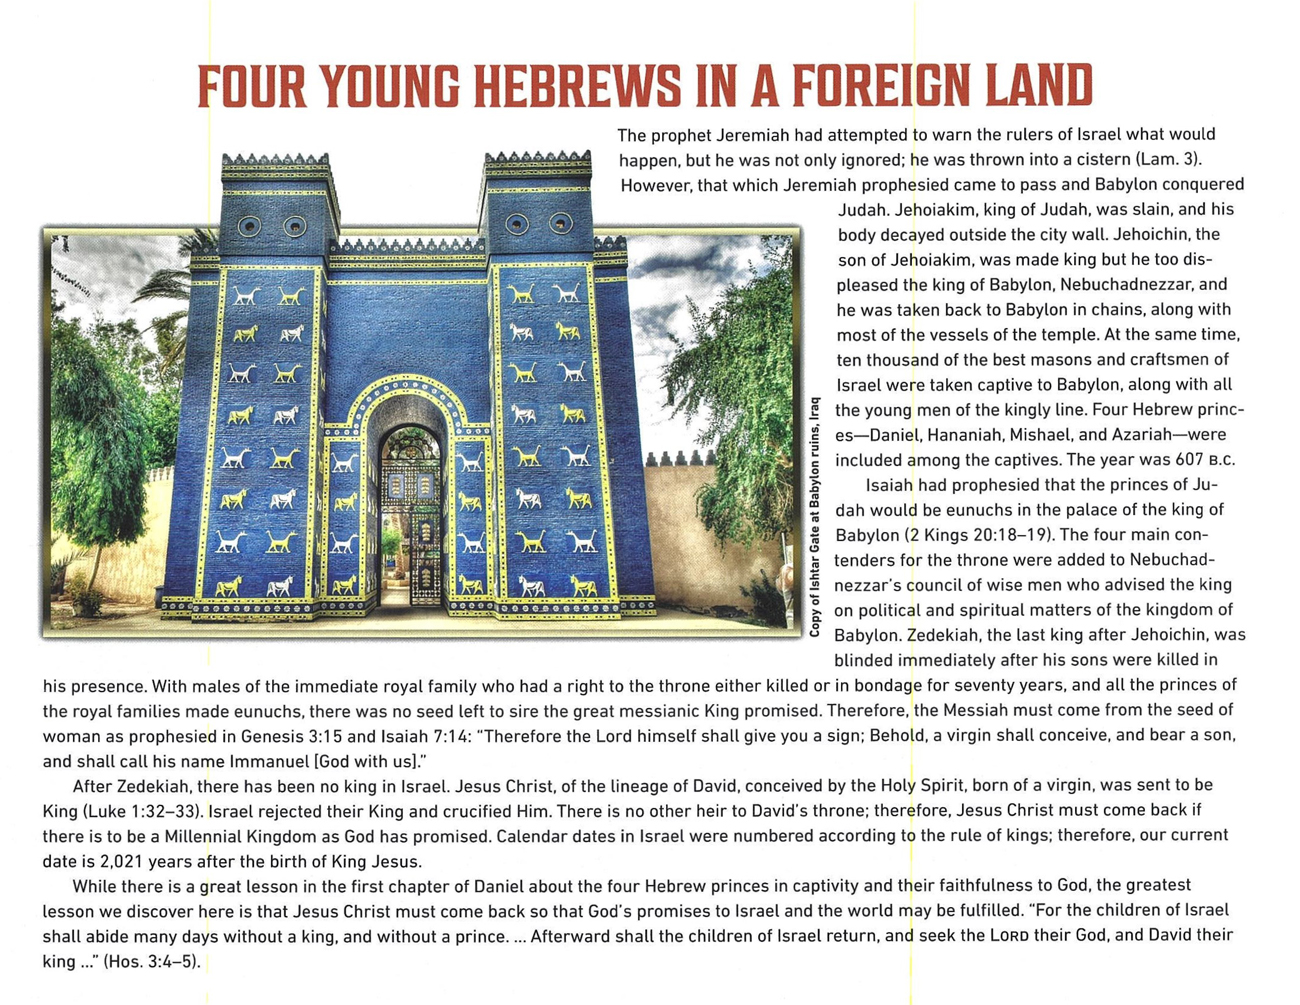 2021 Prophecy Calendar: January - Four Young Hebrews in a Foreign Land